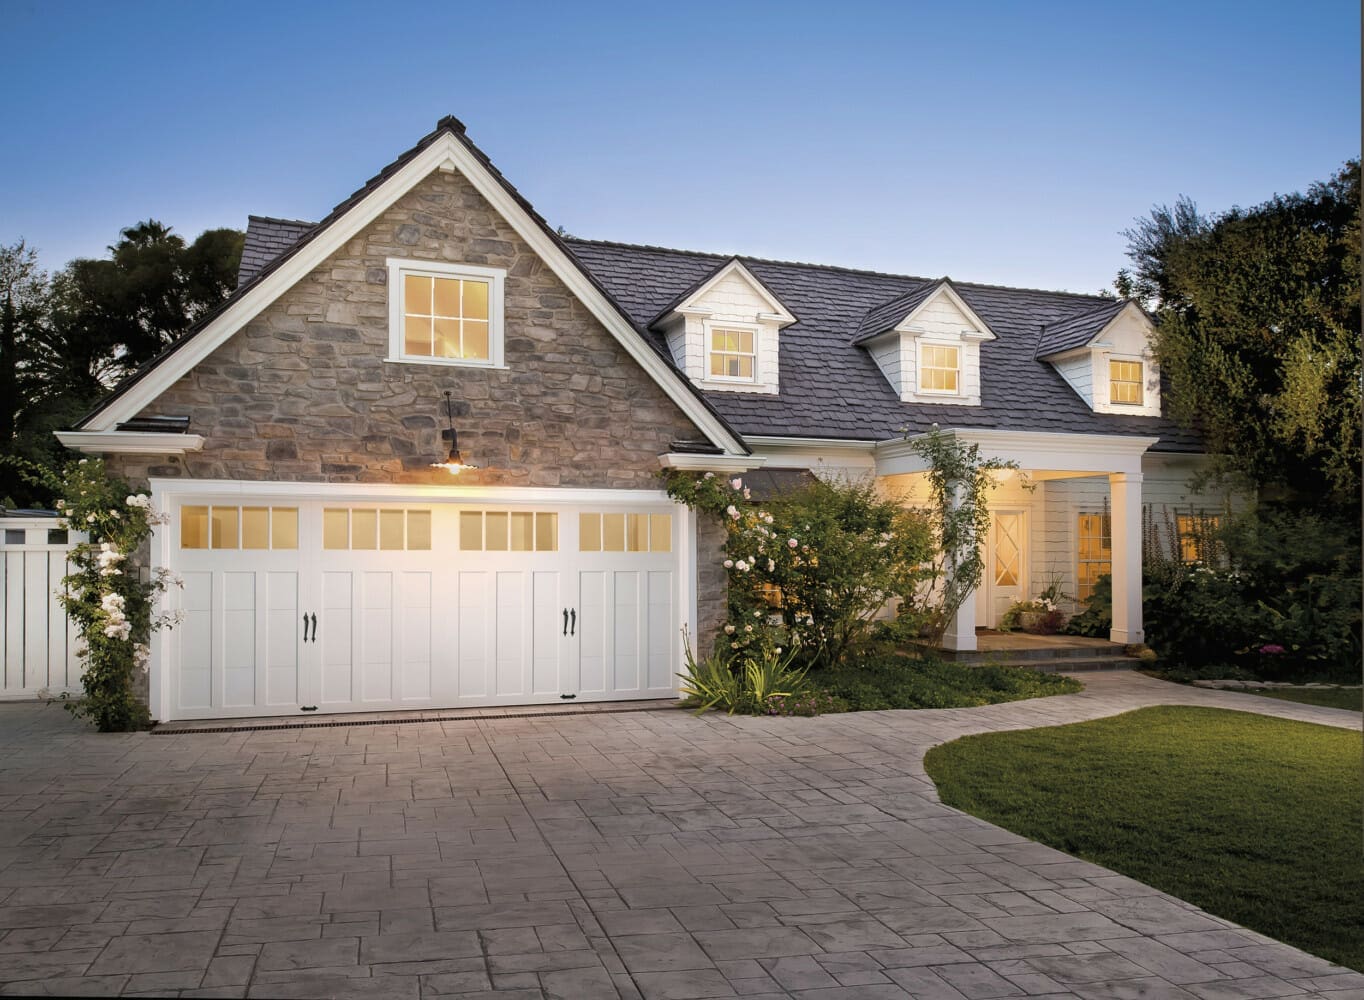 Contemporary garage doors near me in Orange County and San Diego